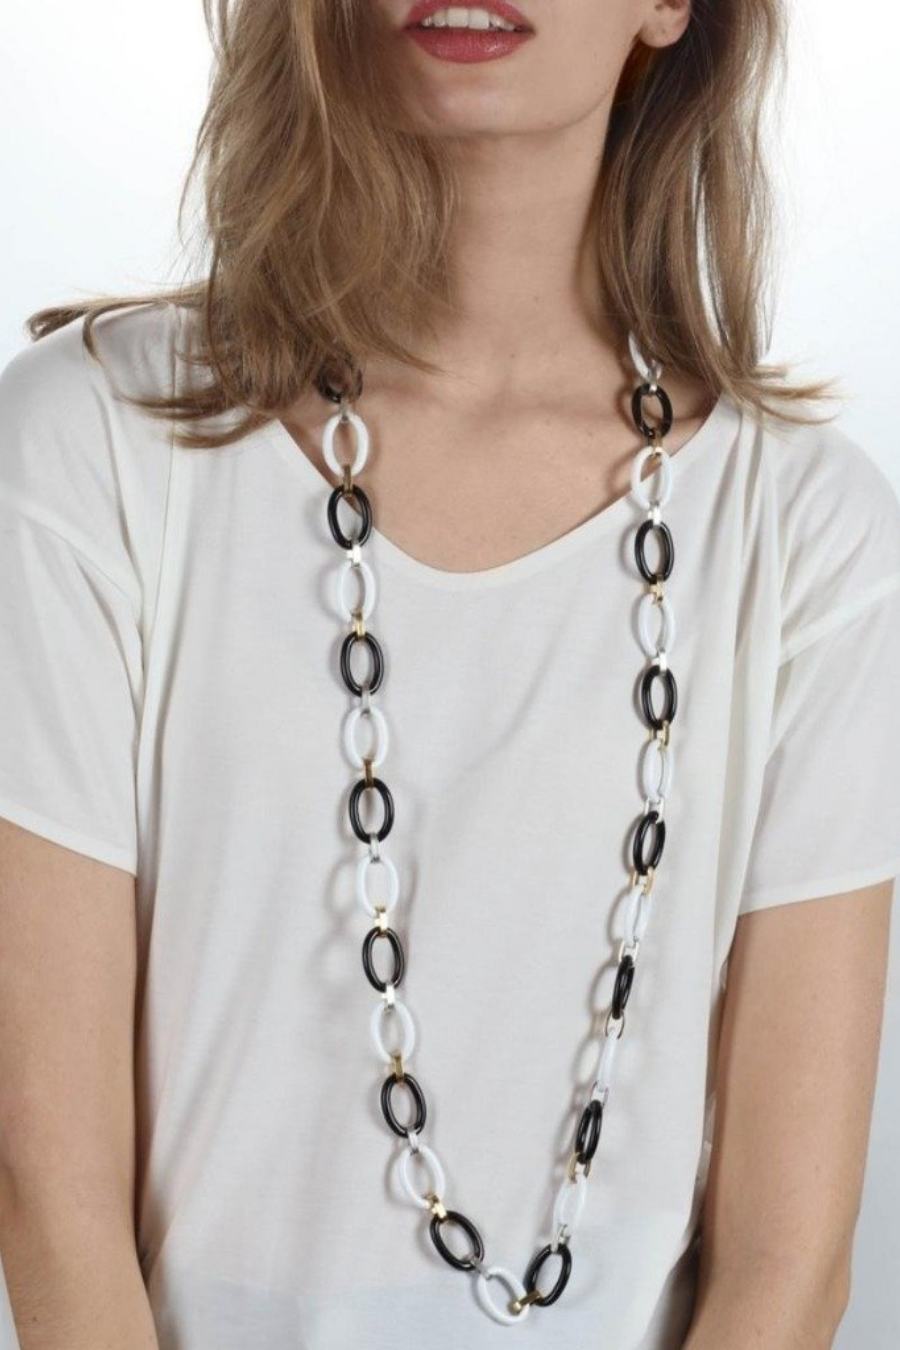 Black and White Chain Link Necklace